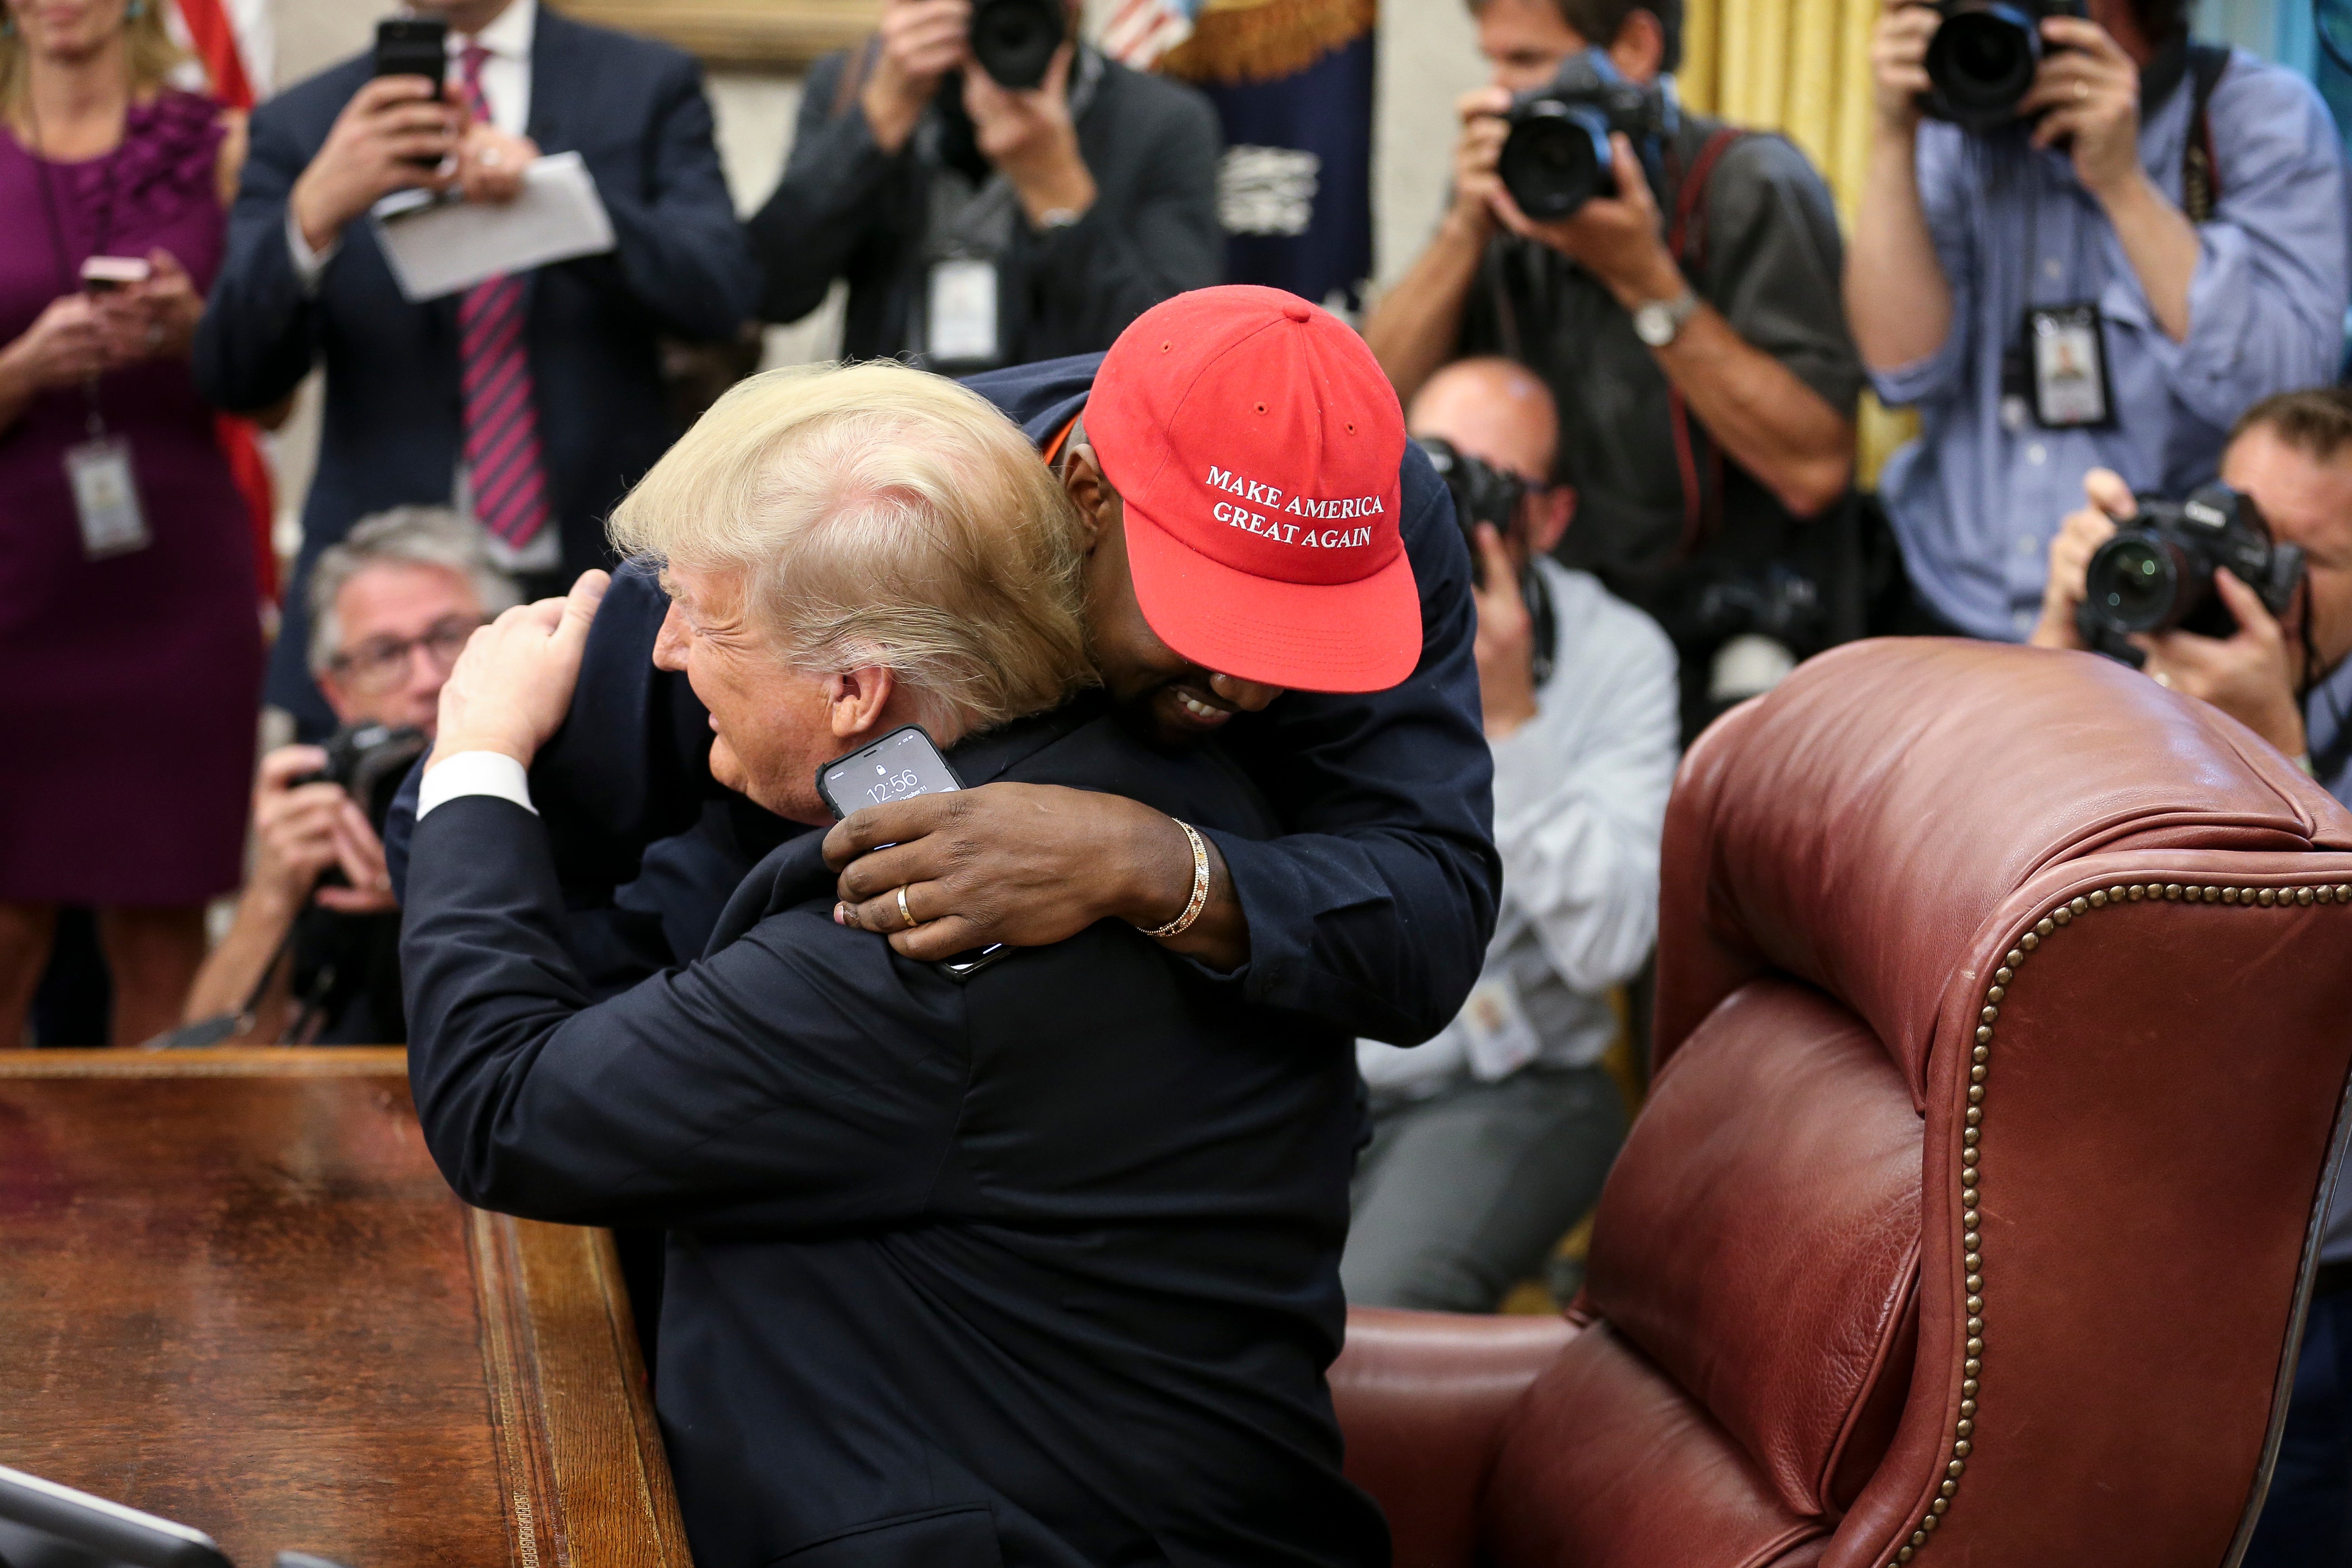 In 2018, West was one of Trump’s highest-profile celebrity supporters